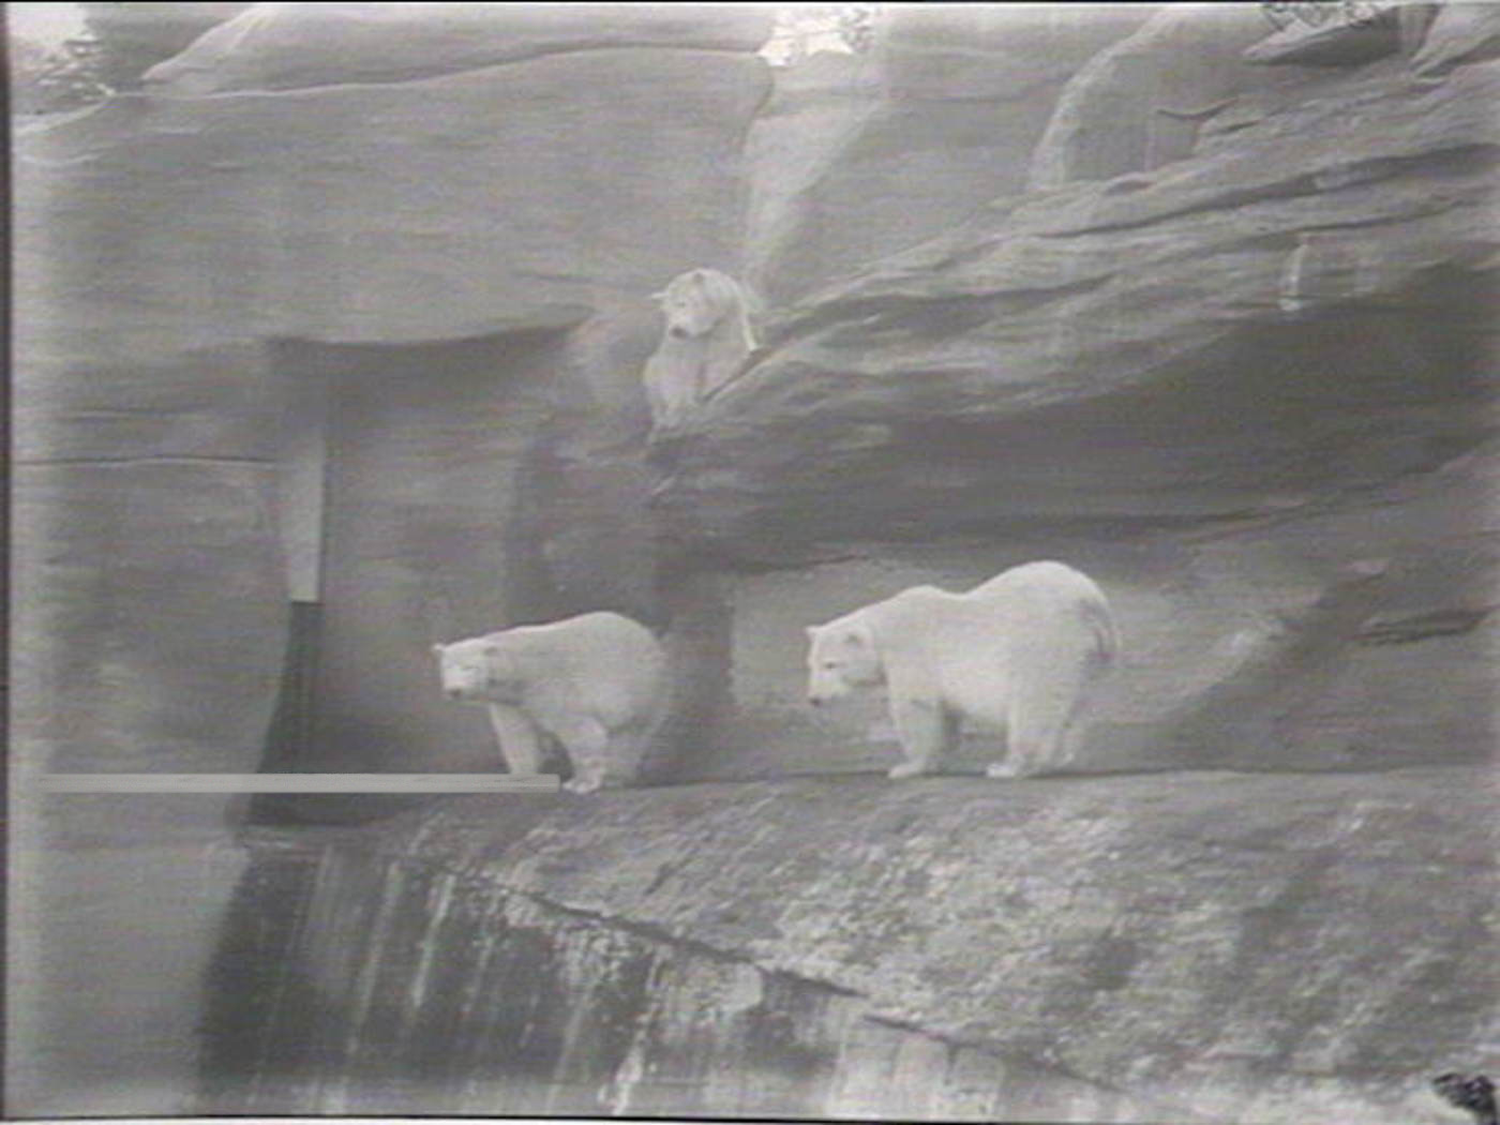 Archival image of three polar bears digitally altered to include a plank of wood leading out of the photo